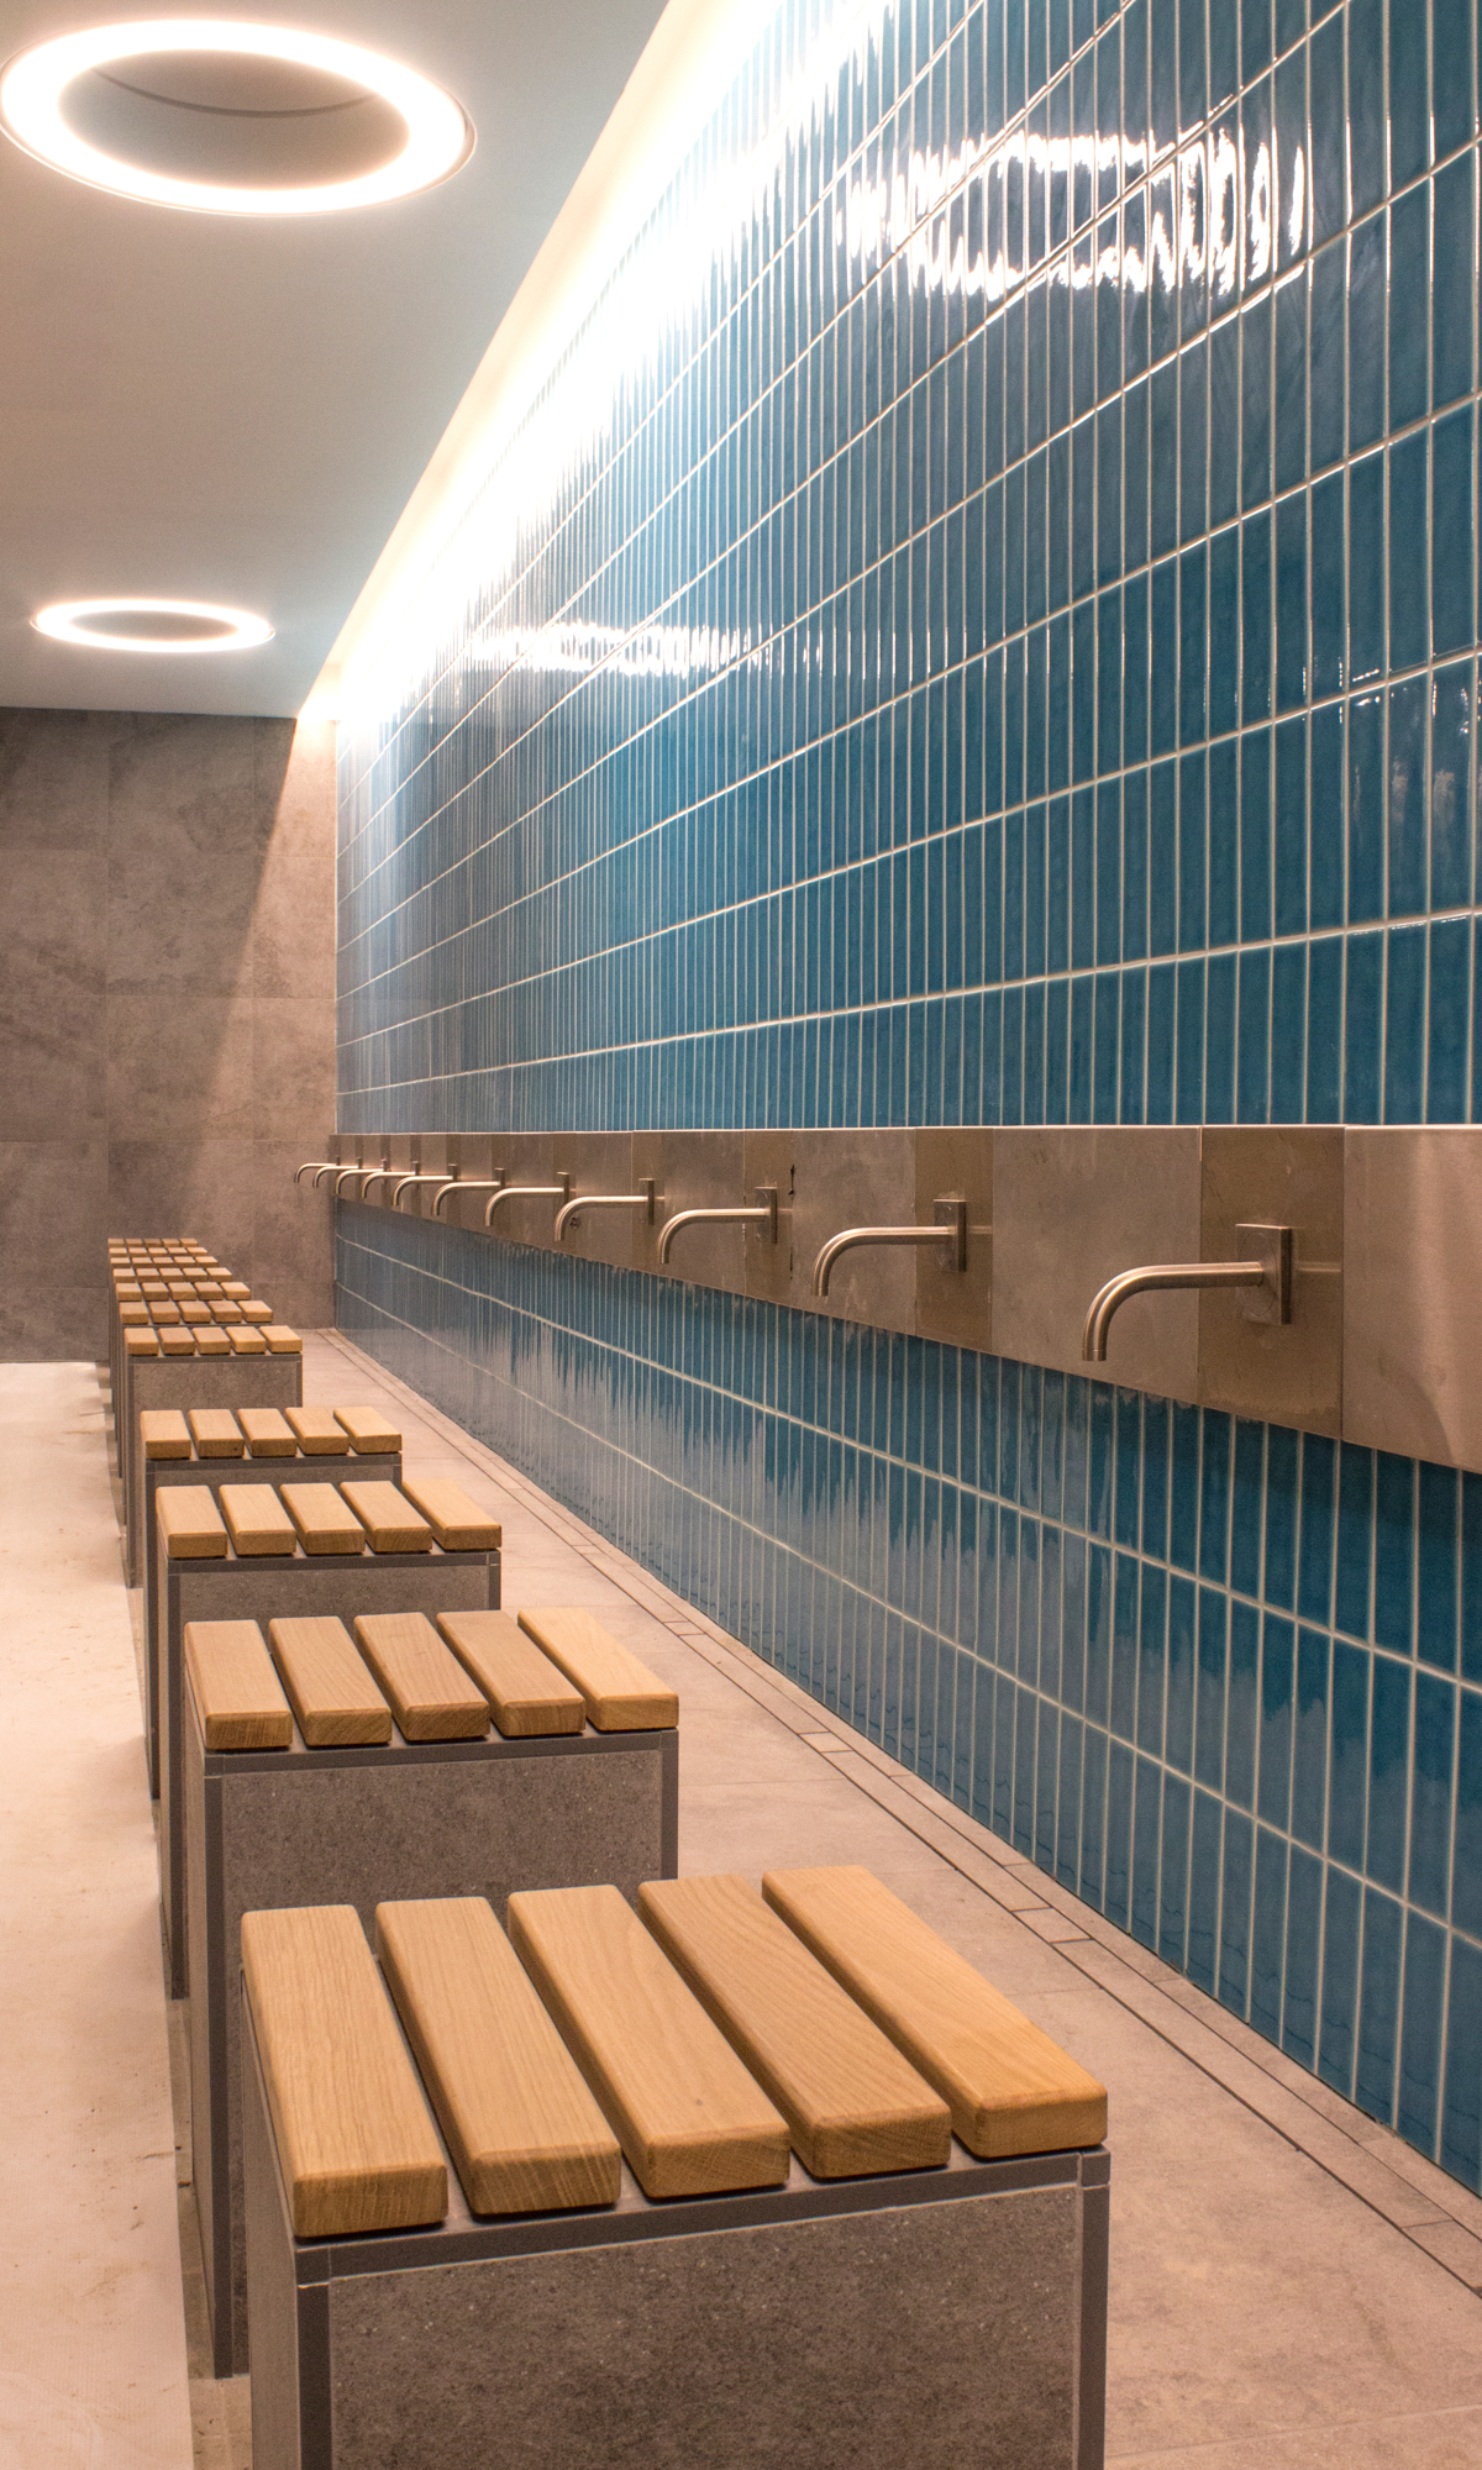 The photograph shows the washing area of the Cambridge Mosque. The stools are made of stone and clad with wooden panels. The taps are fixed to a blue slab wall.